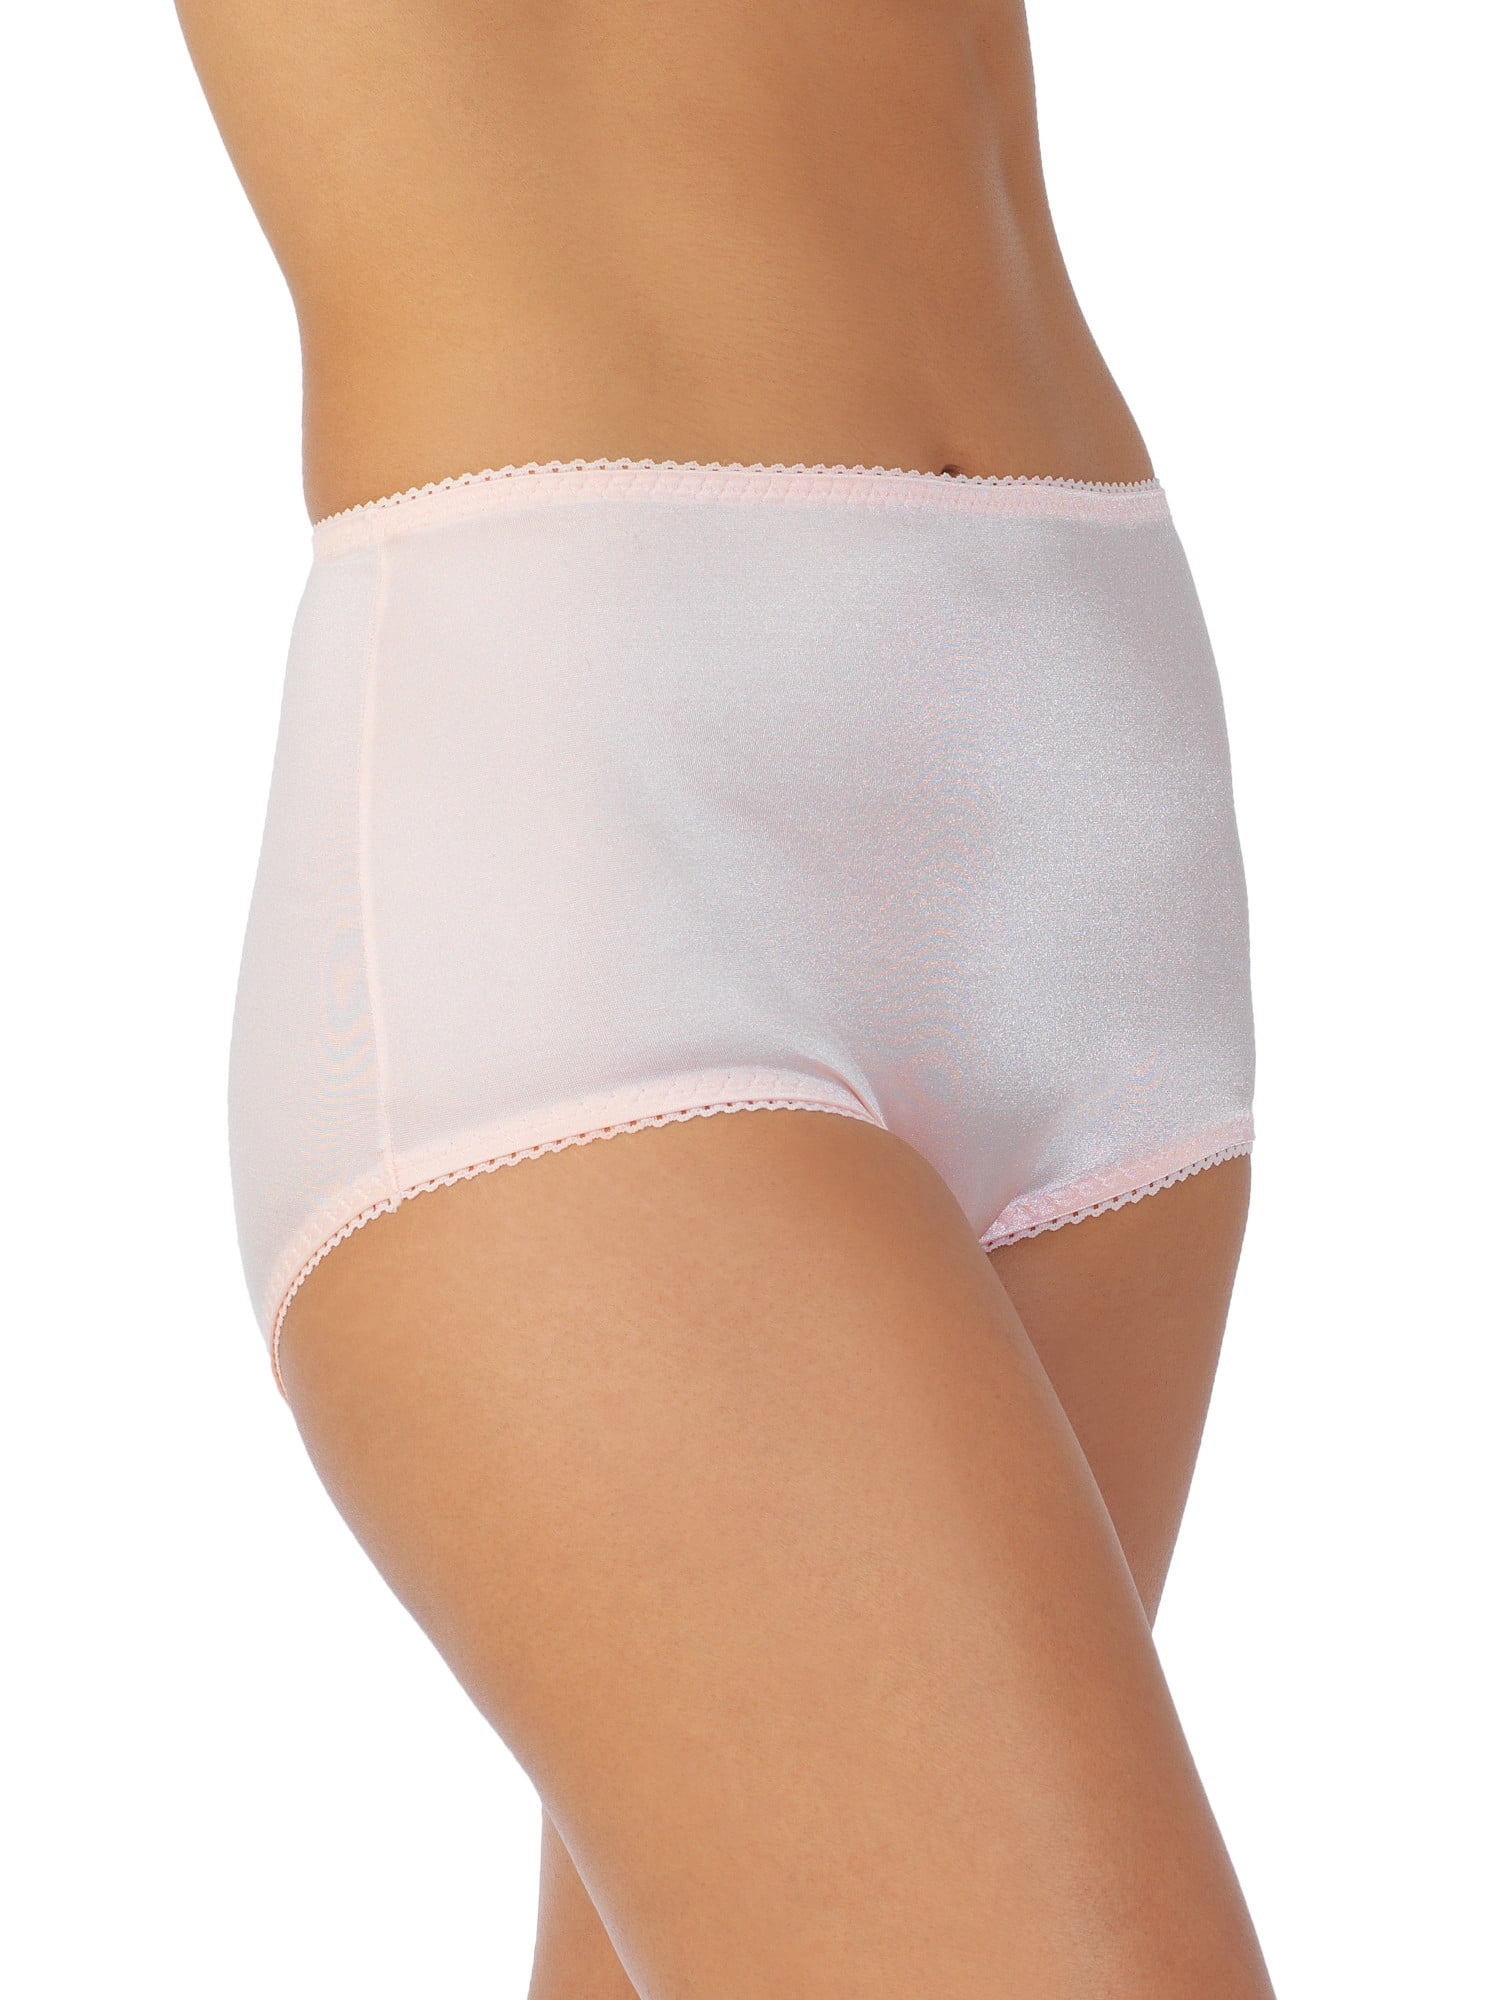  PipipopUSA BRANDY Classic brief style color BEIGE one size  L/XL: a Female Intimate Underwear (70% Cotton/30% Nylon), with a Build-in  White Silicone Prosthesis, Hypoallergenic and Unscented, That Allows Women  to Make